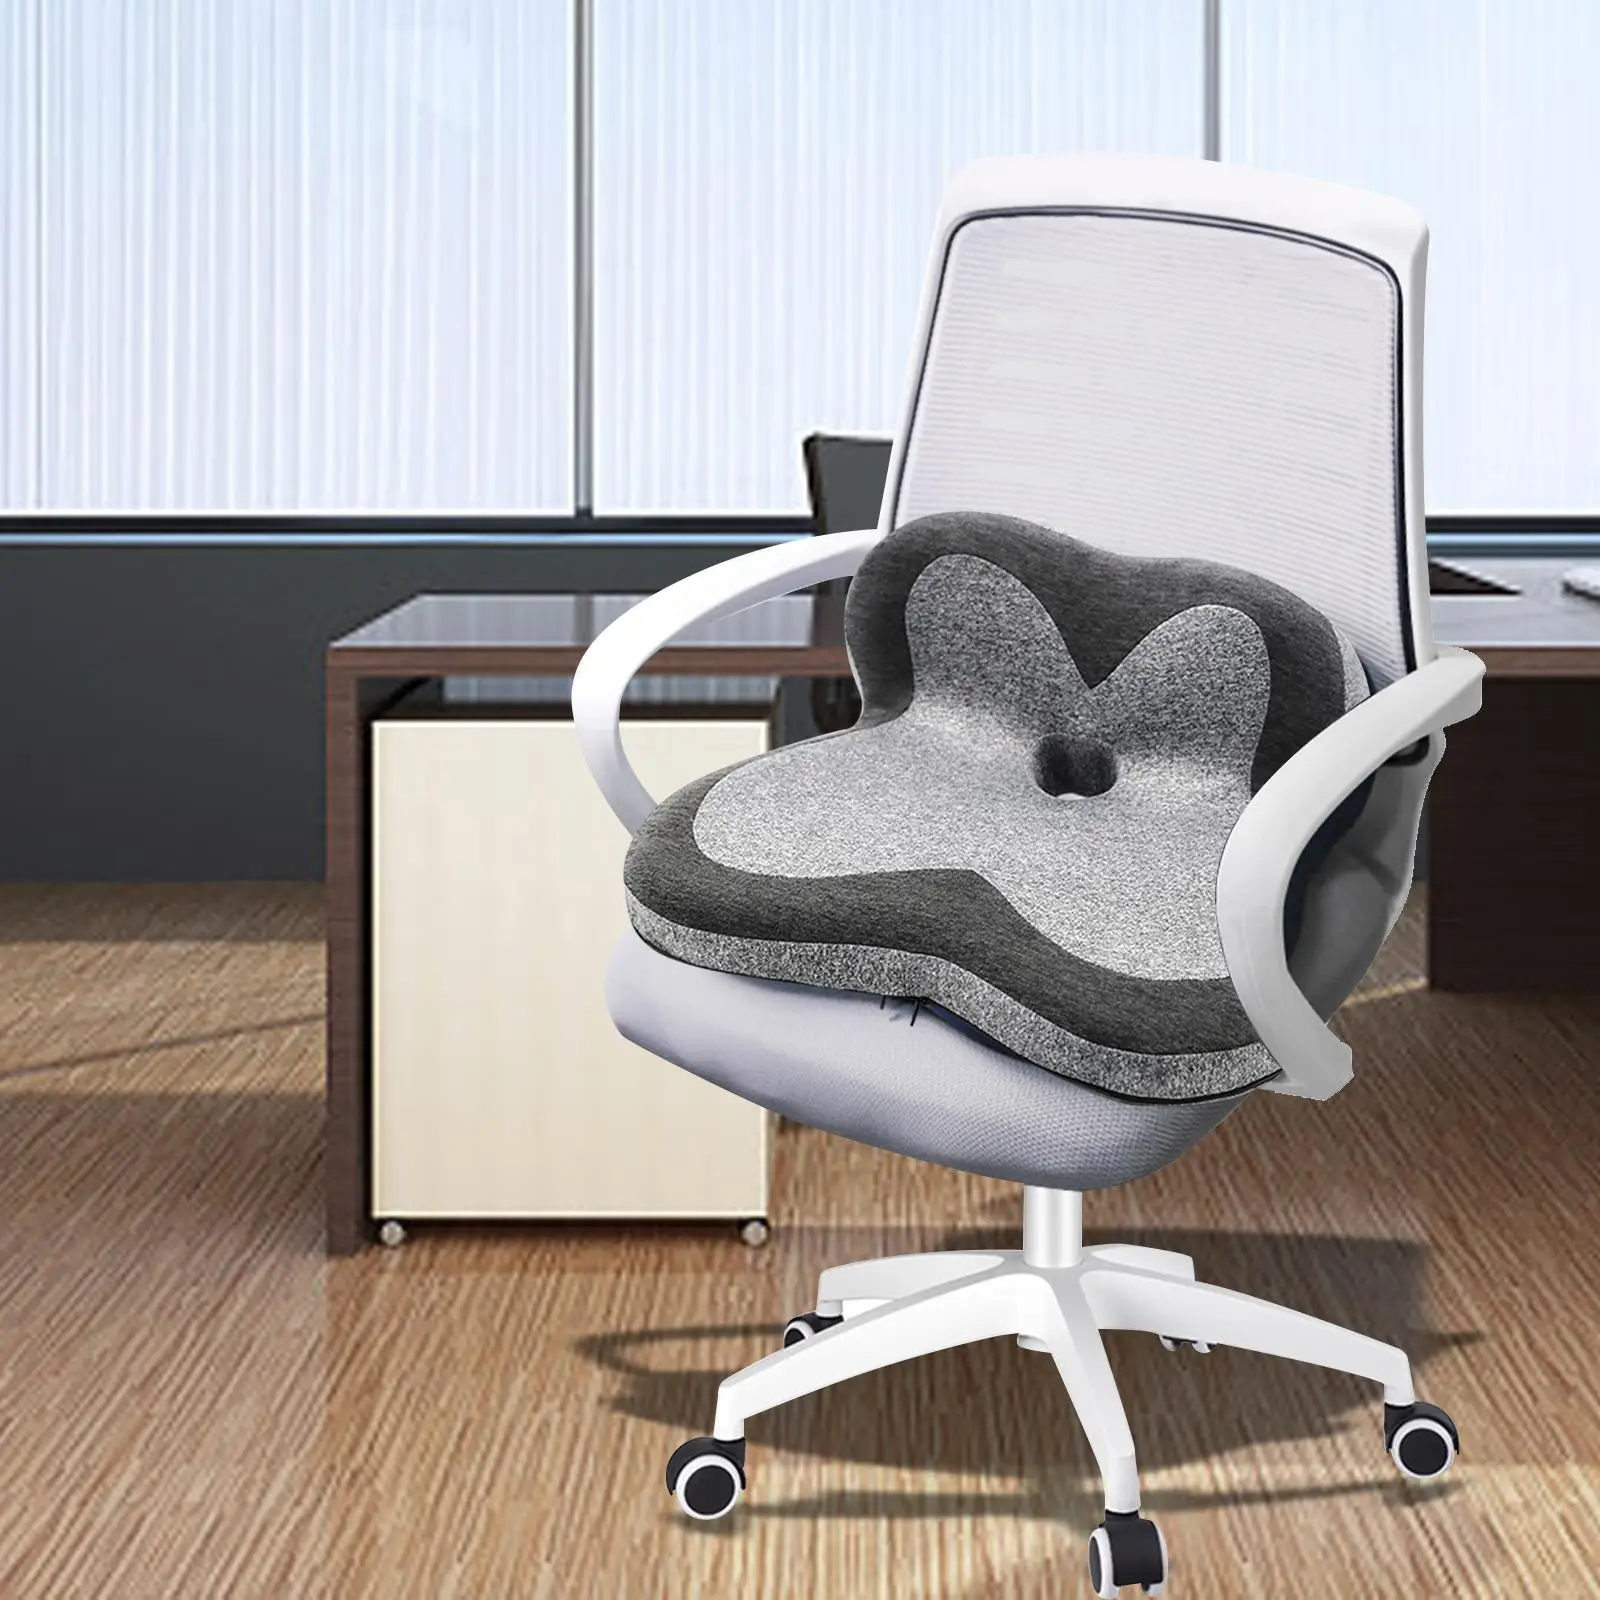 Memory Foam Seat Cushion Soft Comfortable Chair Pad Washable Cover BuPillow for Car Office Chair Long Sitting Computer Desk